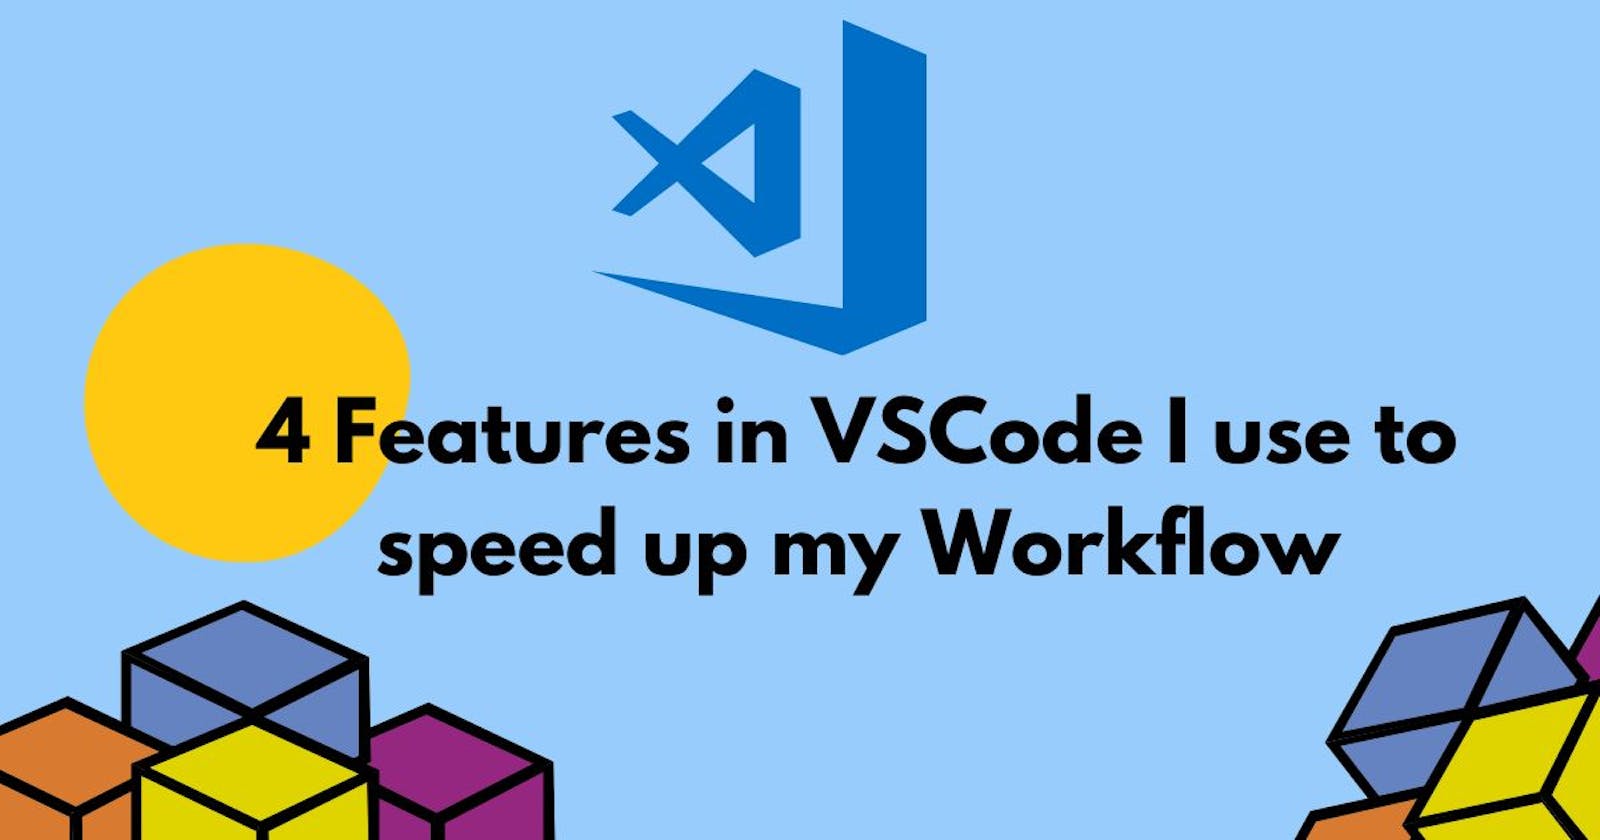 4 Features in VSCode I use to speed up my Workflow